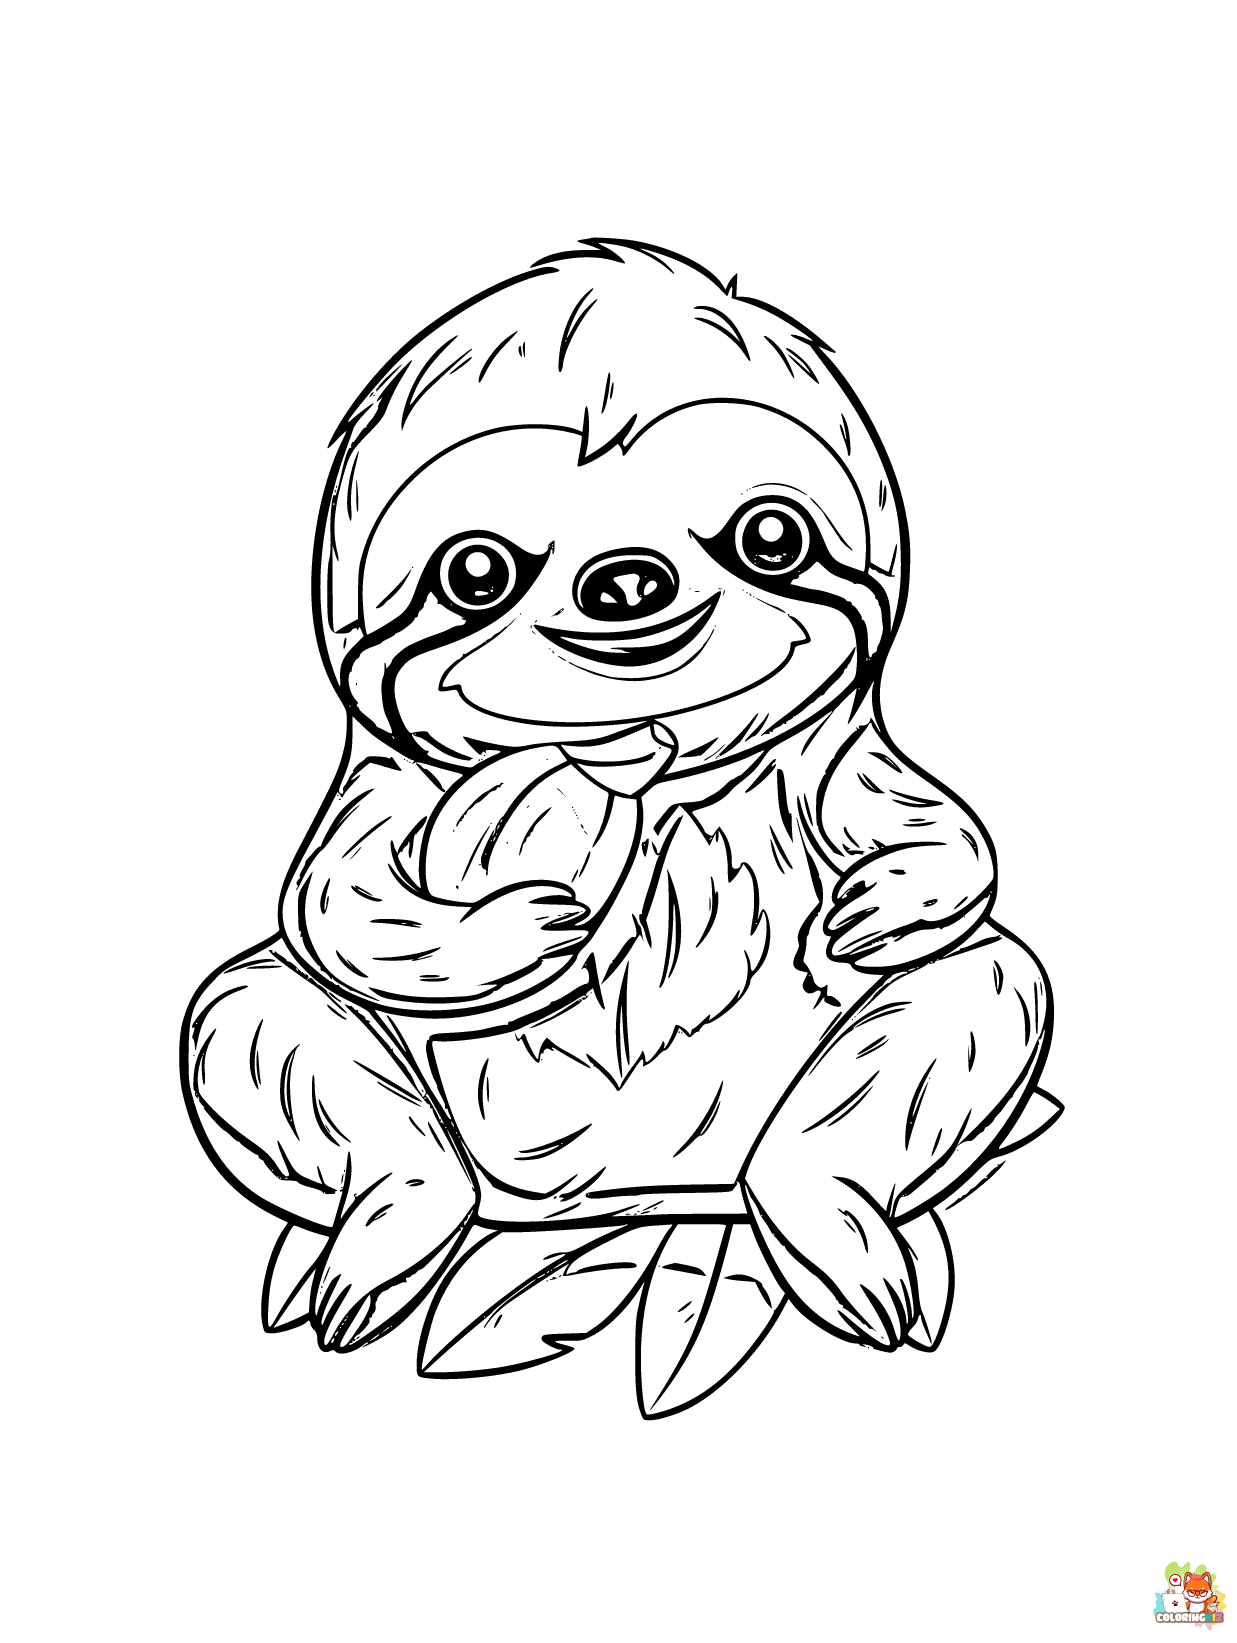 Sloth coloring pages printable free